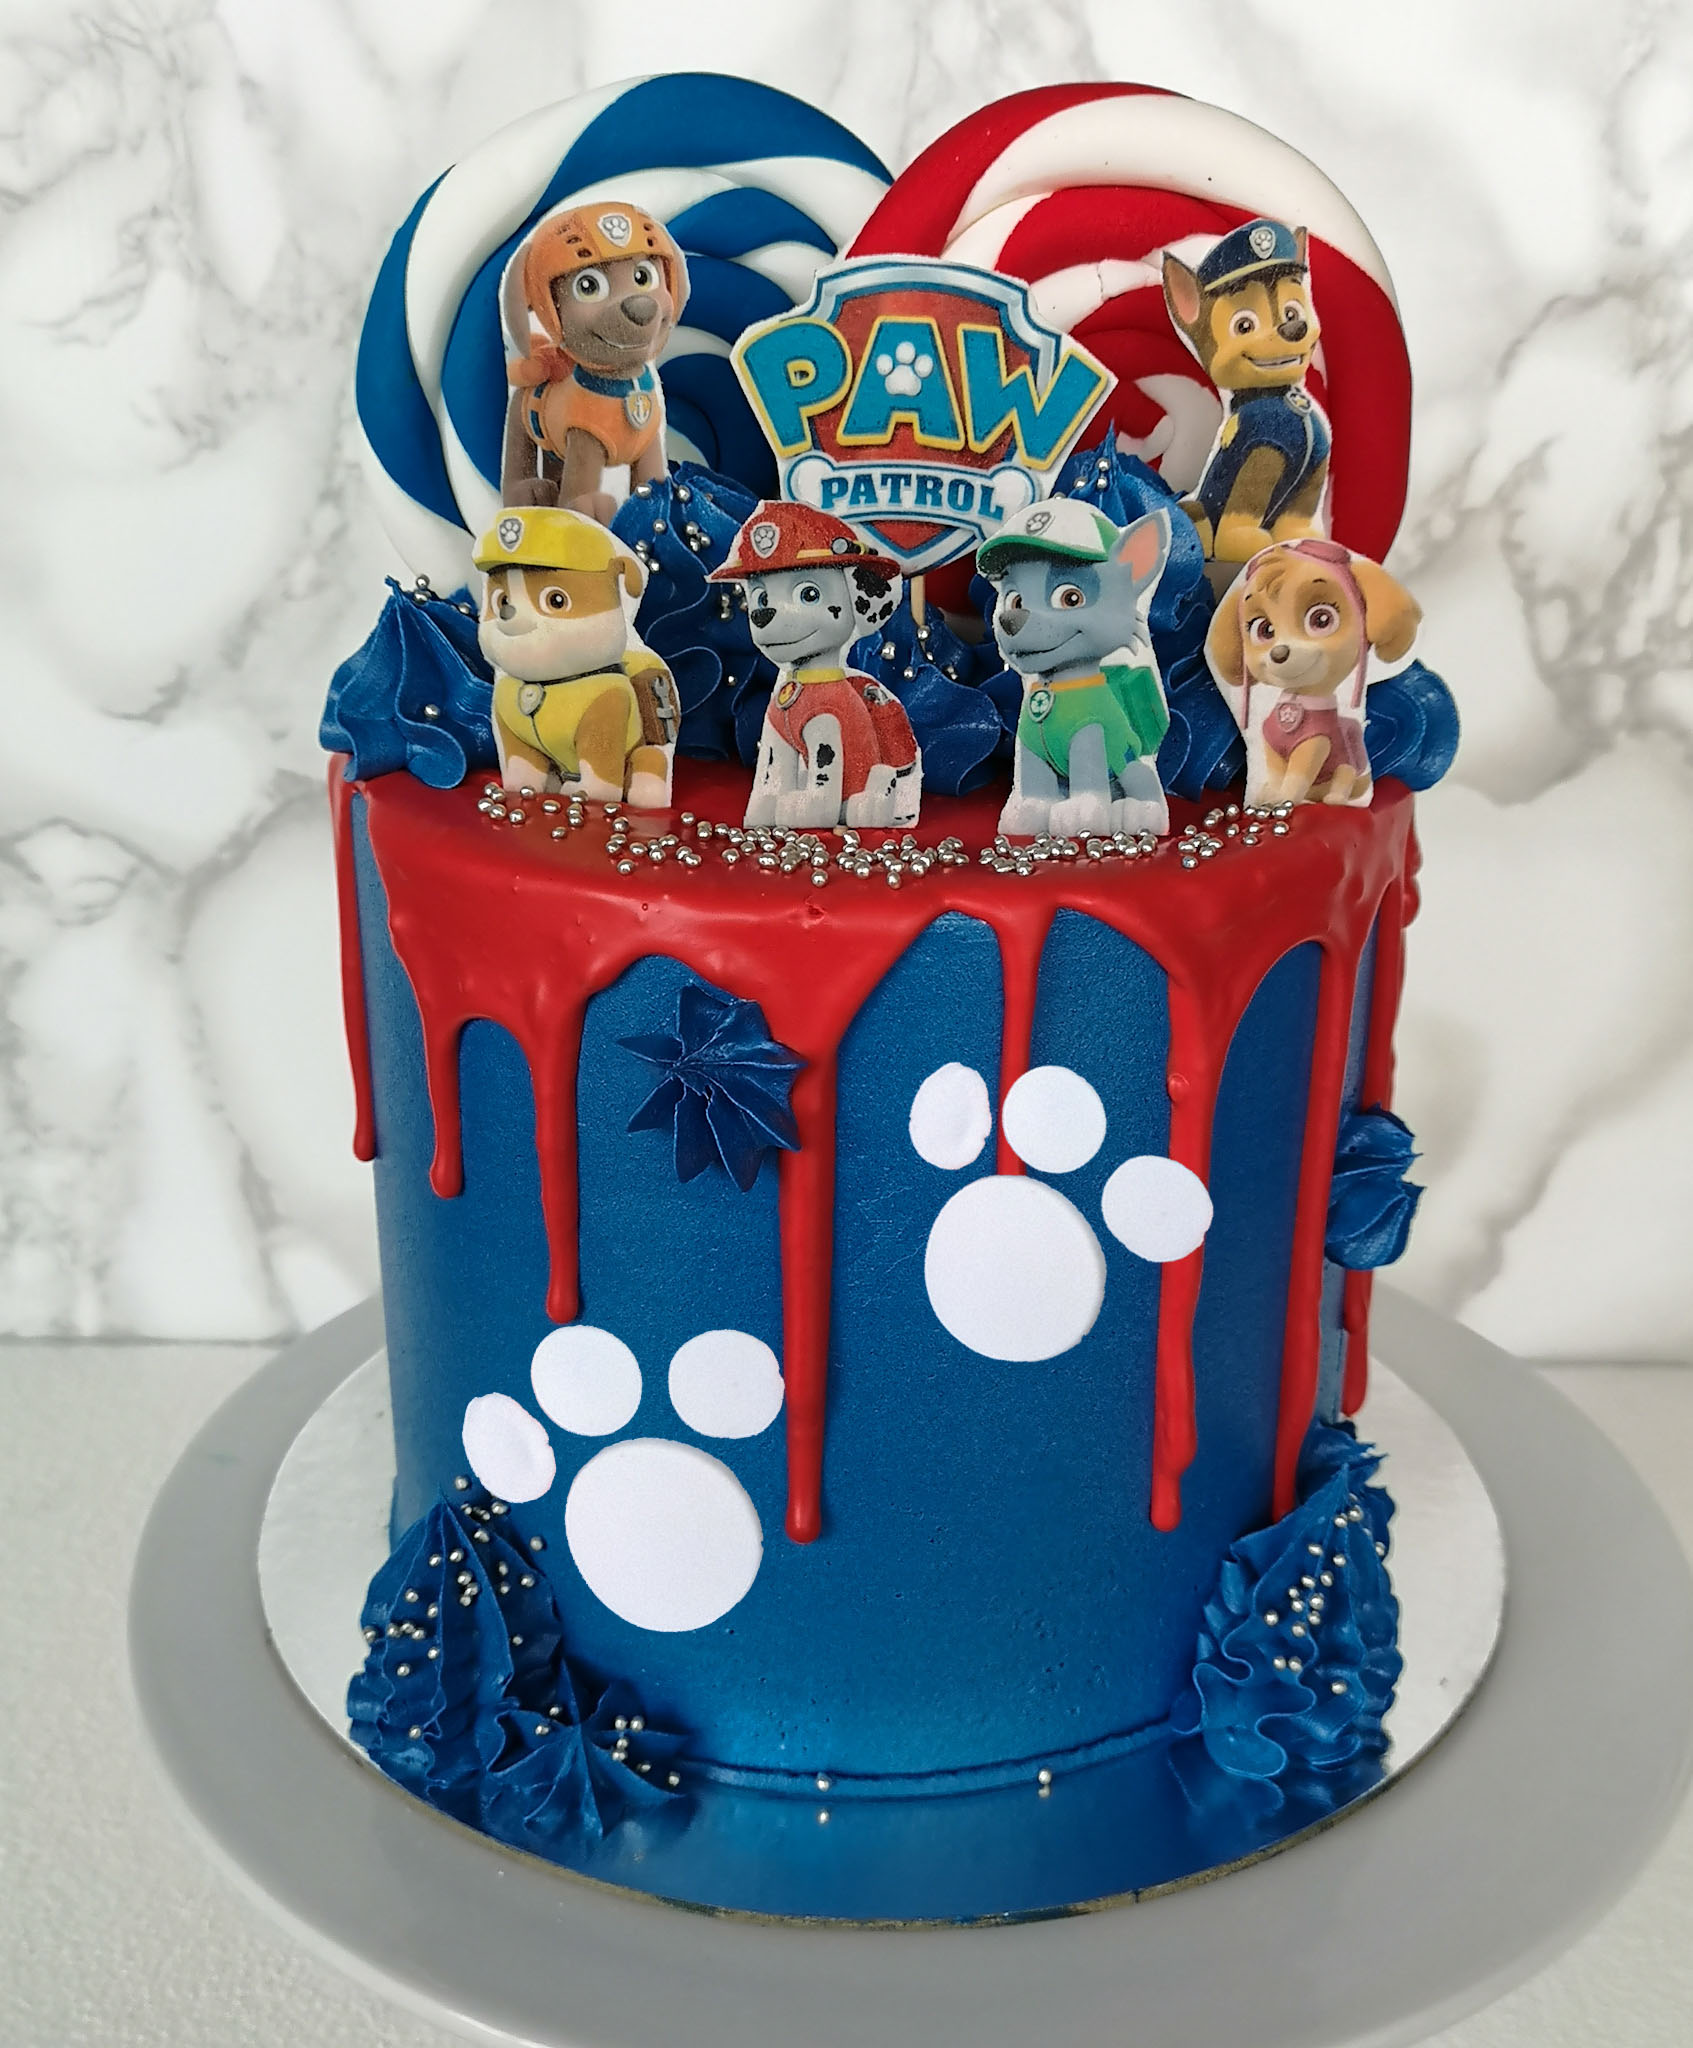 Paw Patrol Party - Decorating ideas to rock